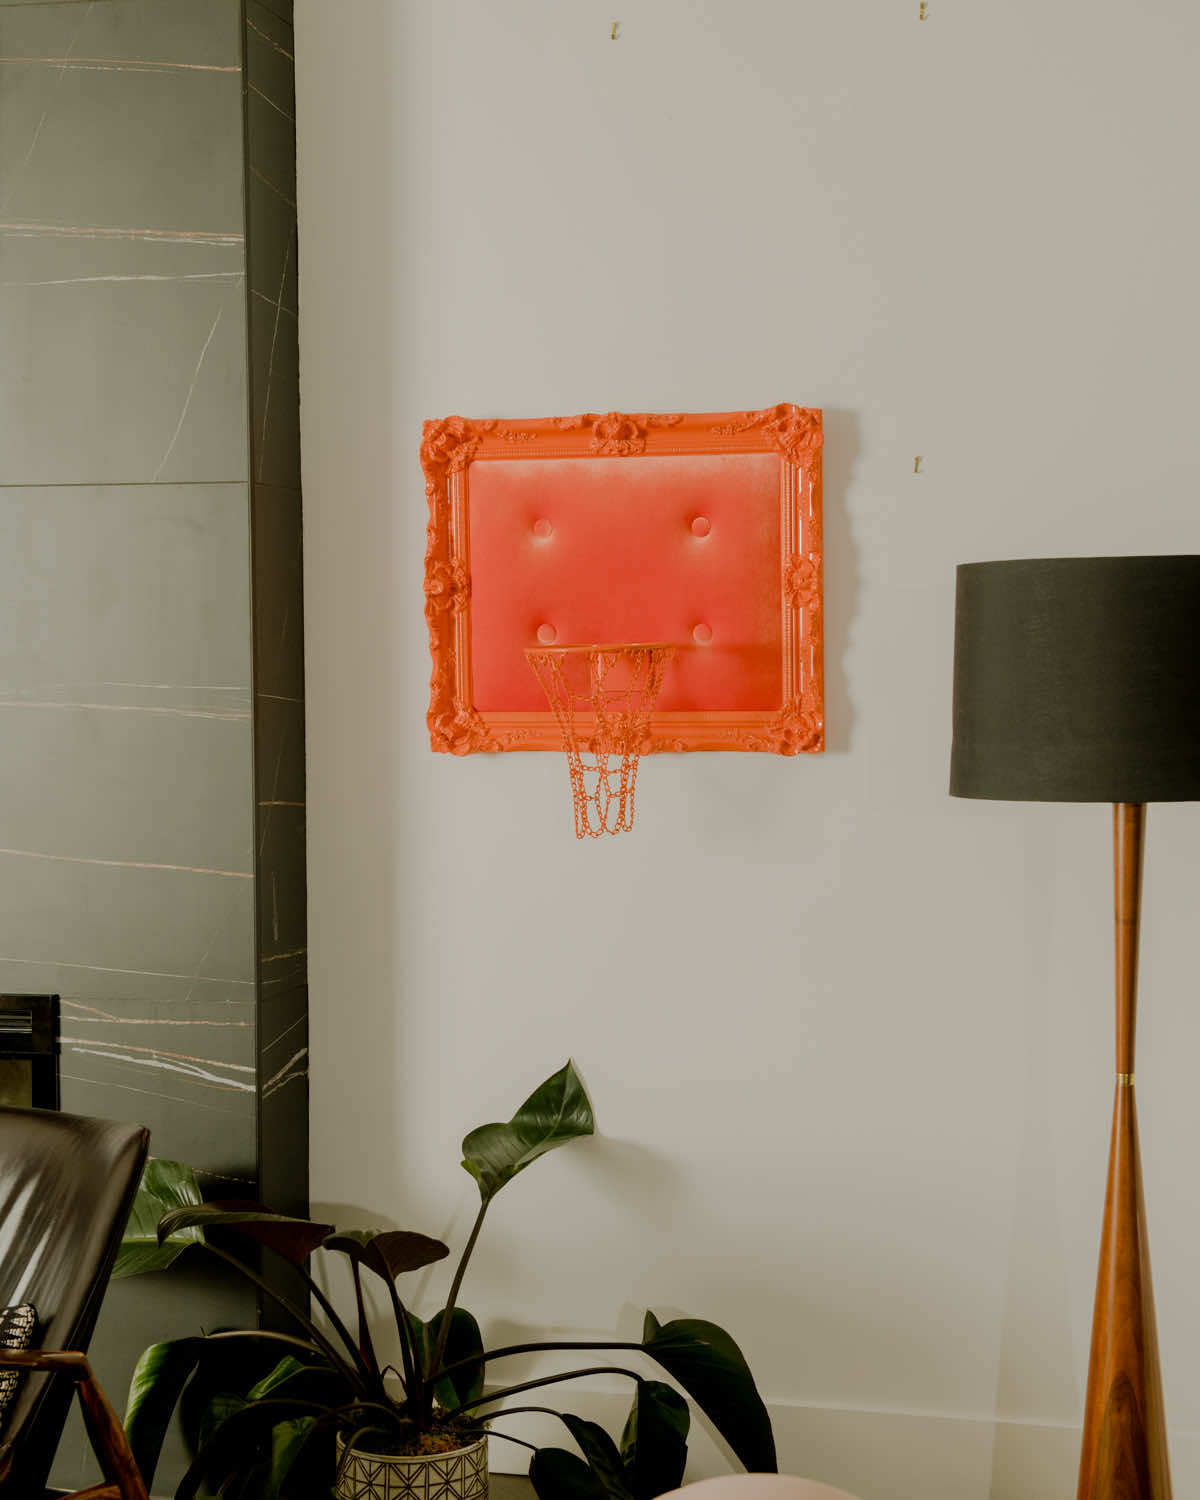 A living room with a basketball hoop on the wall.